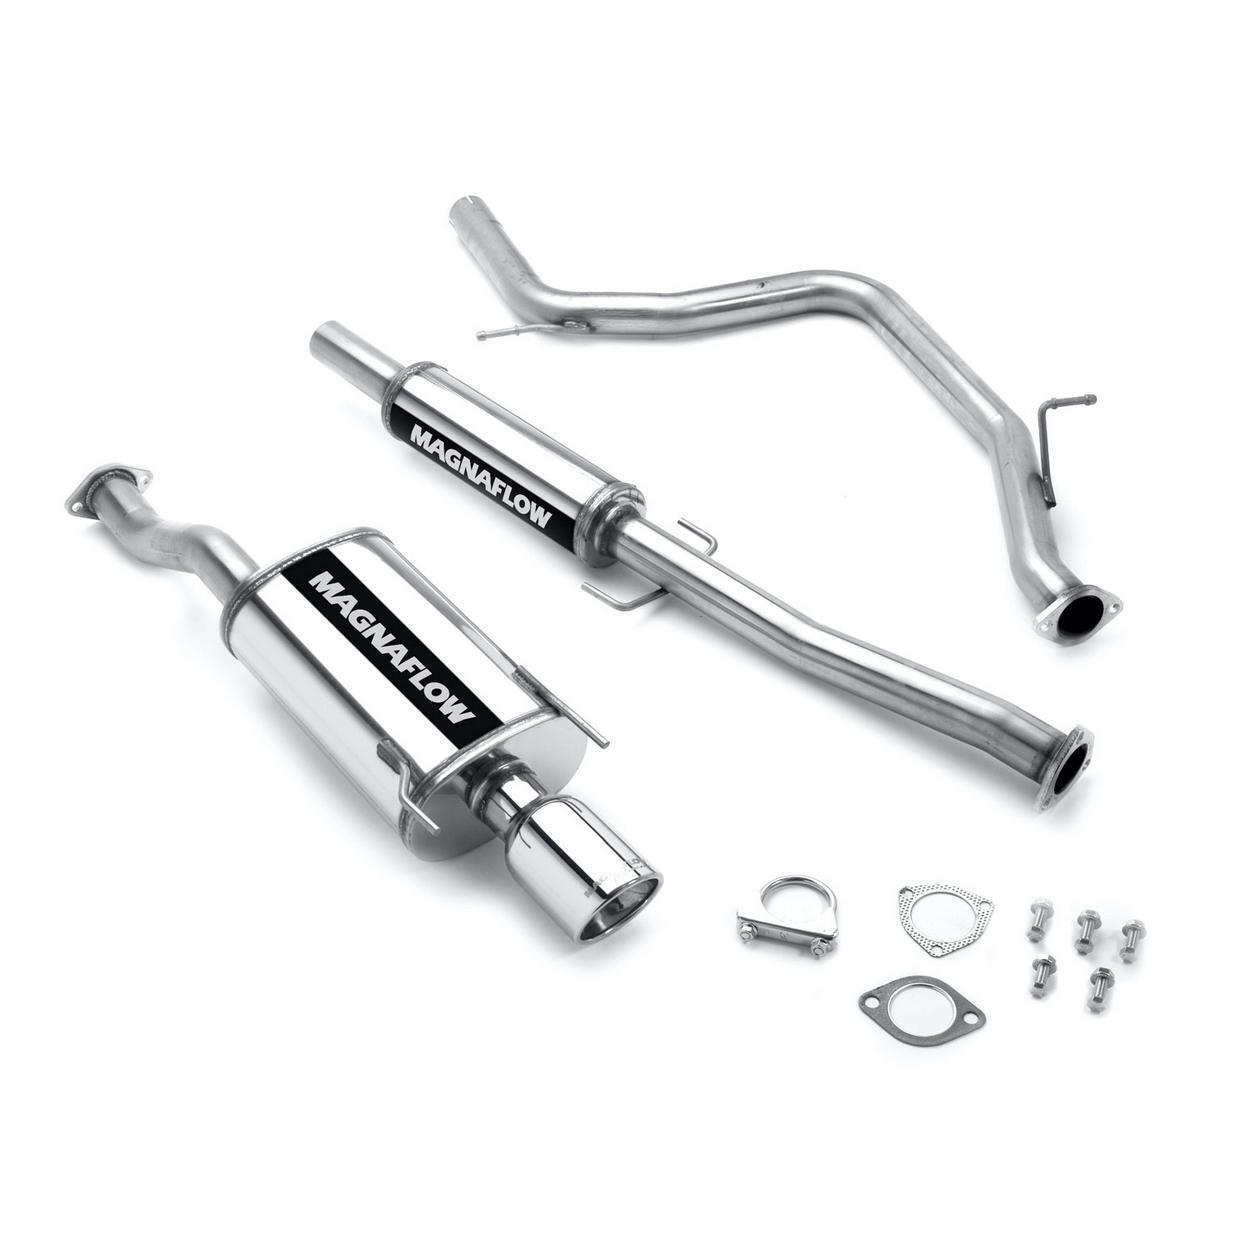 MagnaFlow Exhaust System Kit - Fits: 1994-1997 Honda Accord Street Series Stainl